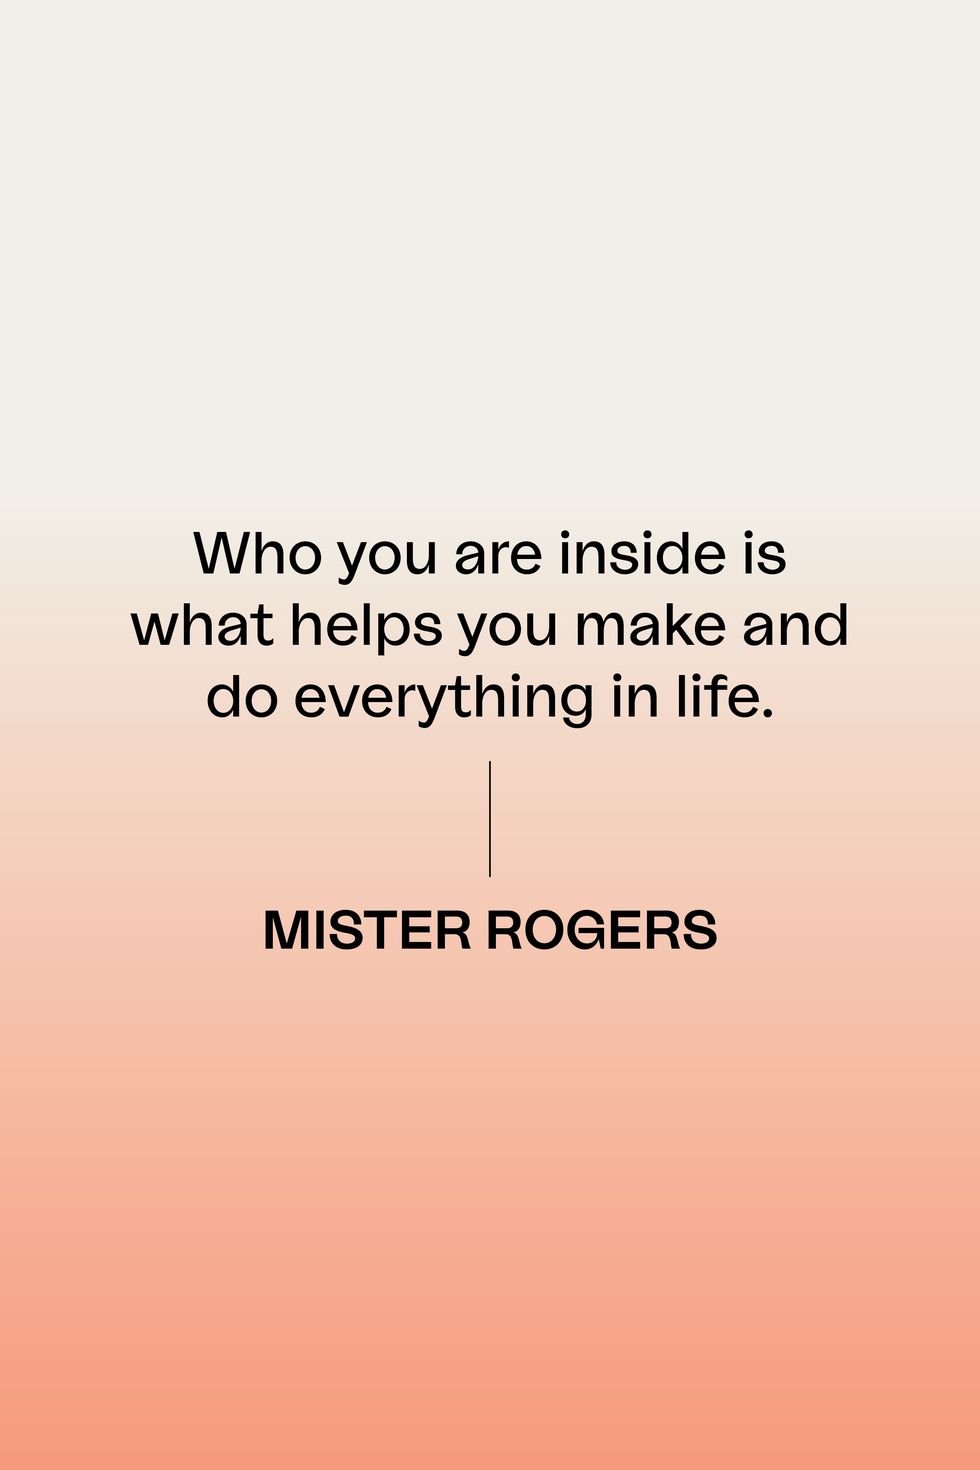 fred rogers quote